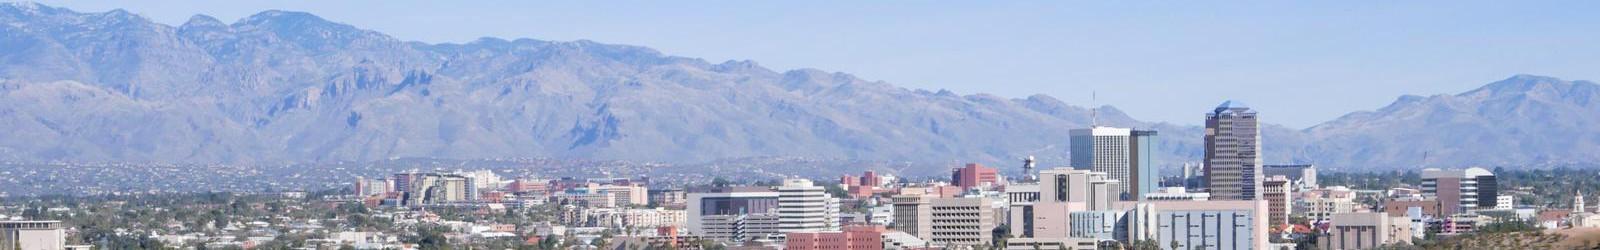 Child or Adolescent Issues therapists in Tucson, Arizona